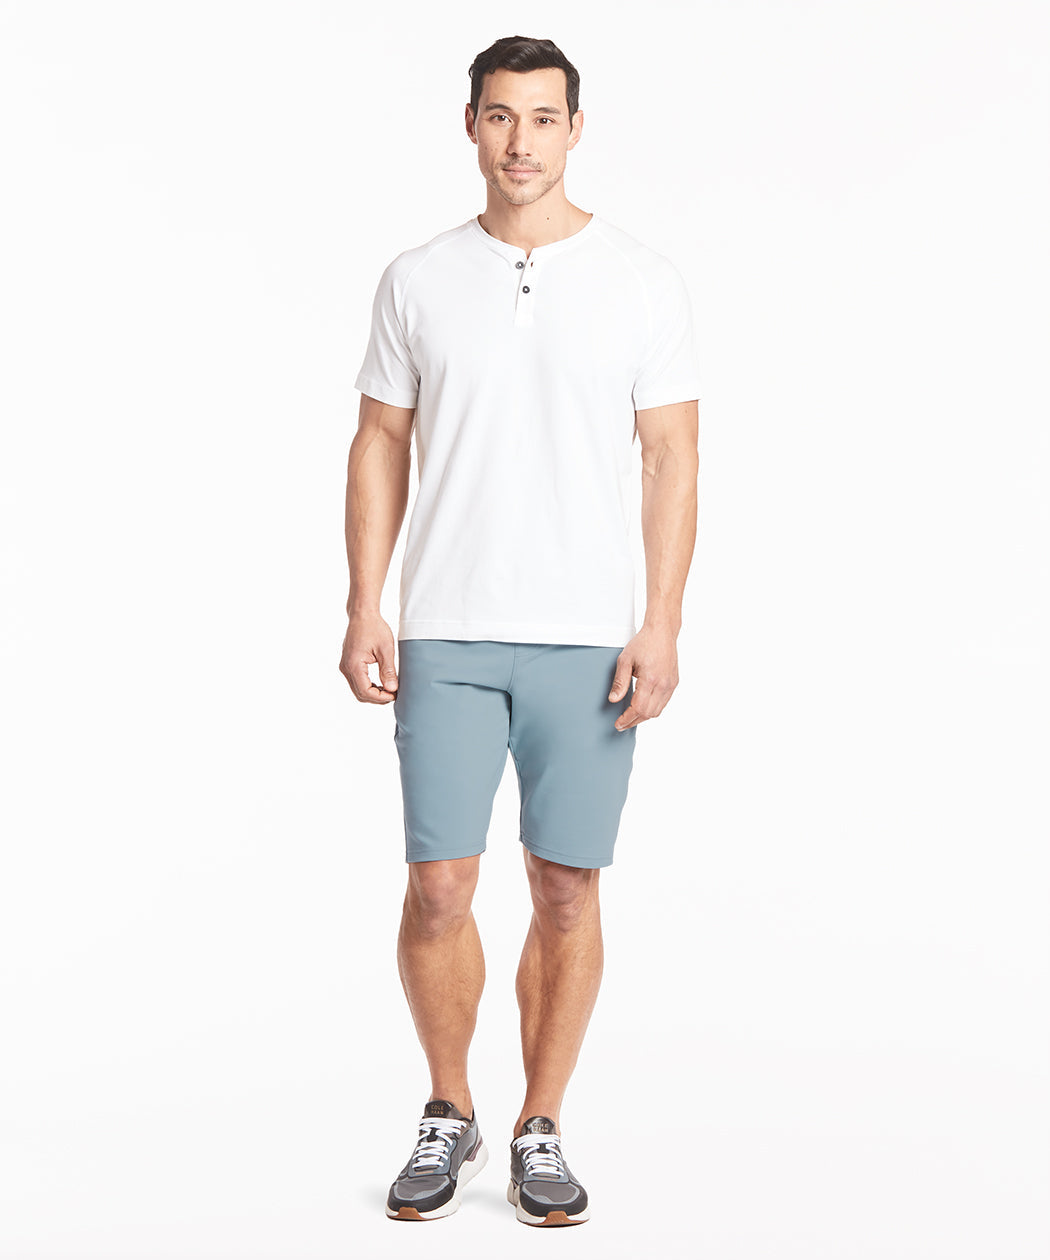 All Day Every Day Short | Men's Mist